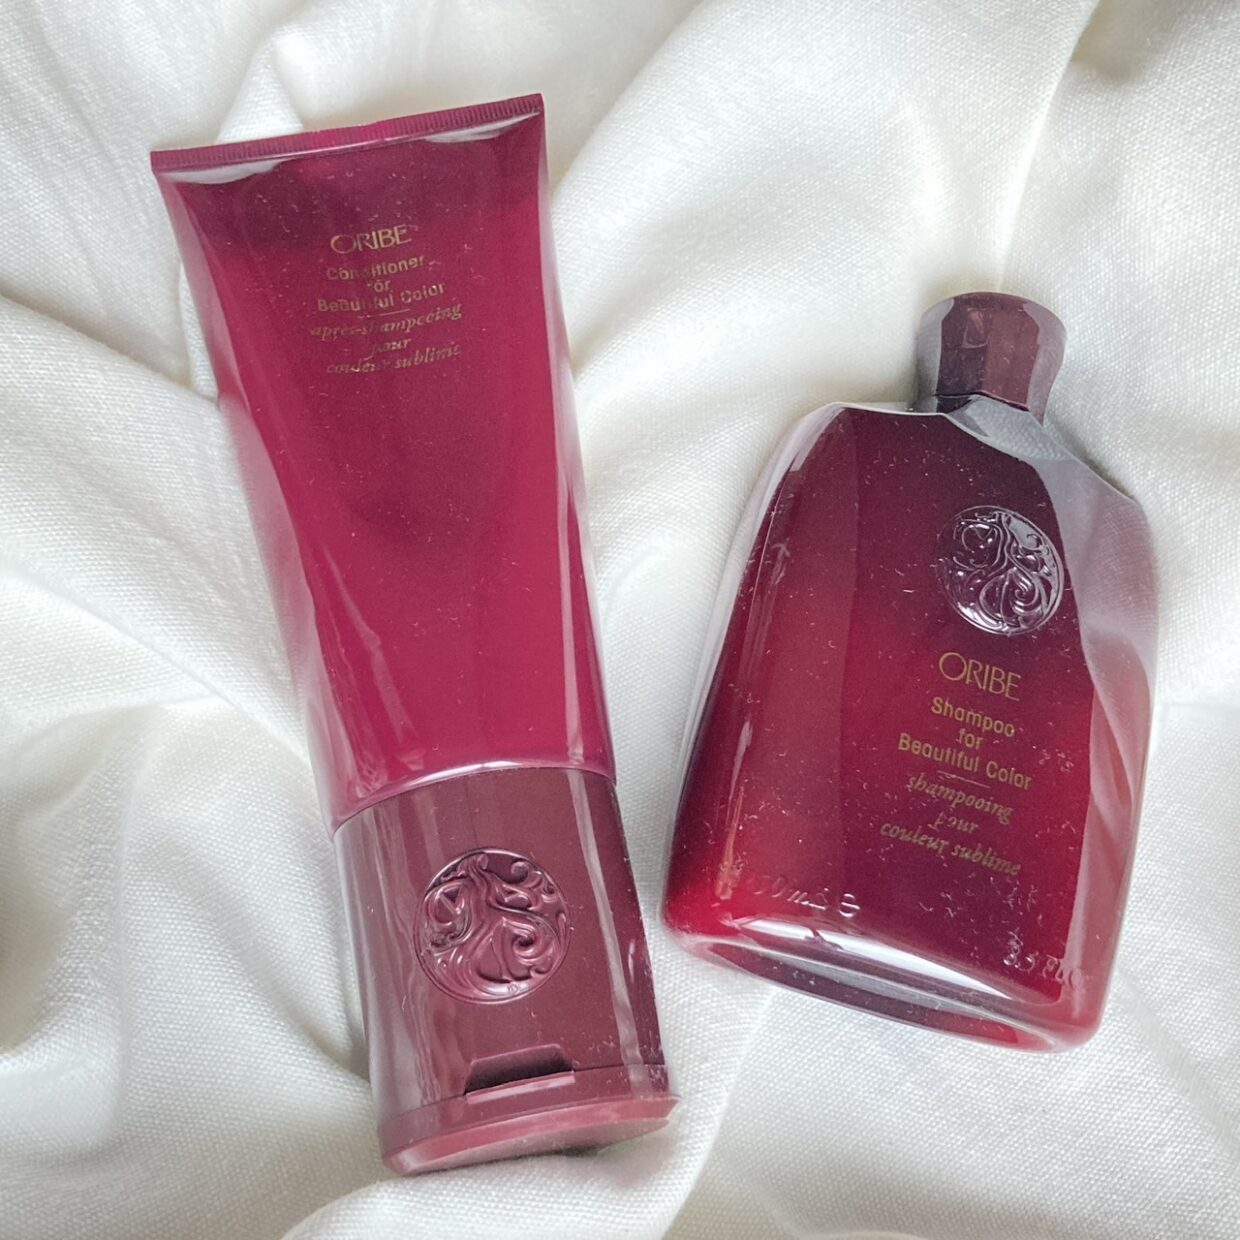 ORIBE Beautiful color セレブ愛用
Used by celebrities